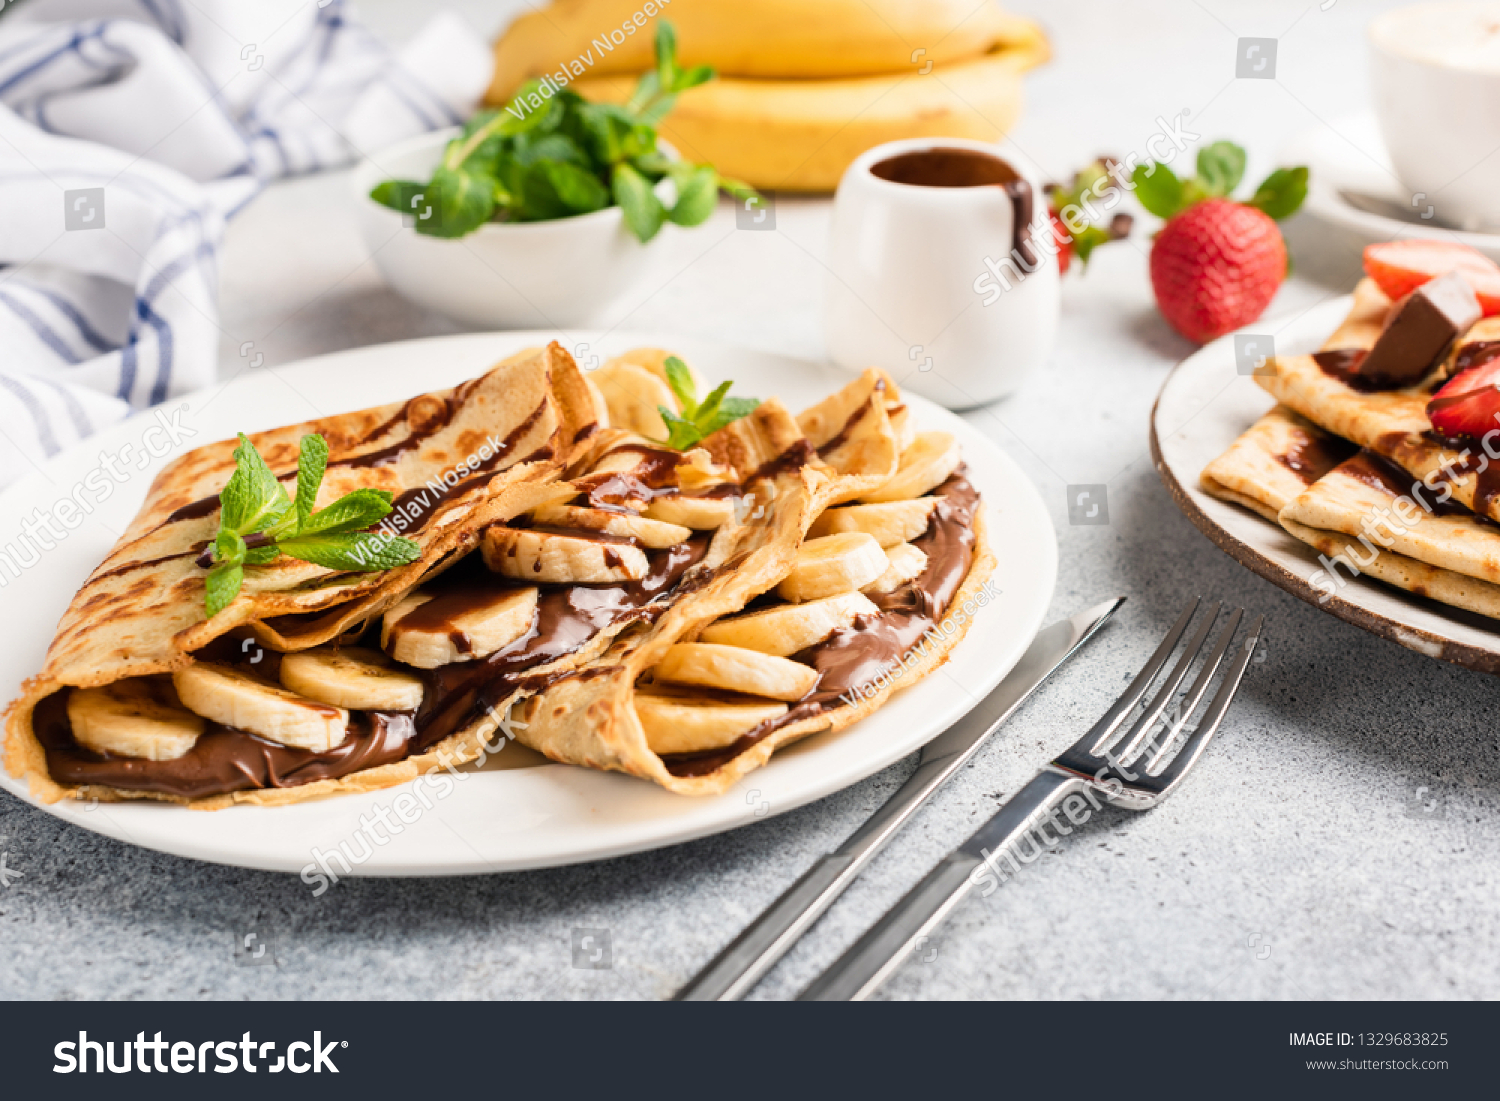 Chocolate hazelnut spread and banana filled crepes on plate. Tasty crepes or blini with sweet sauce and fruits. Closeup view #1329683825